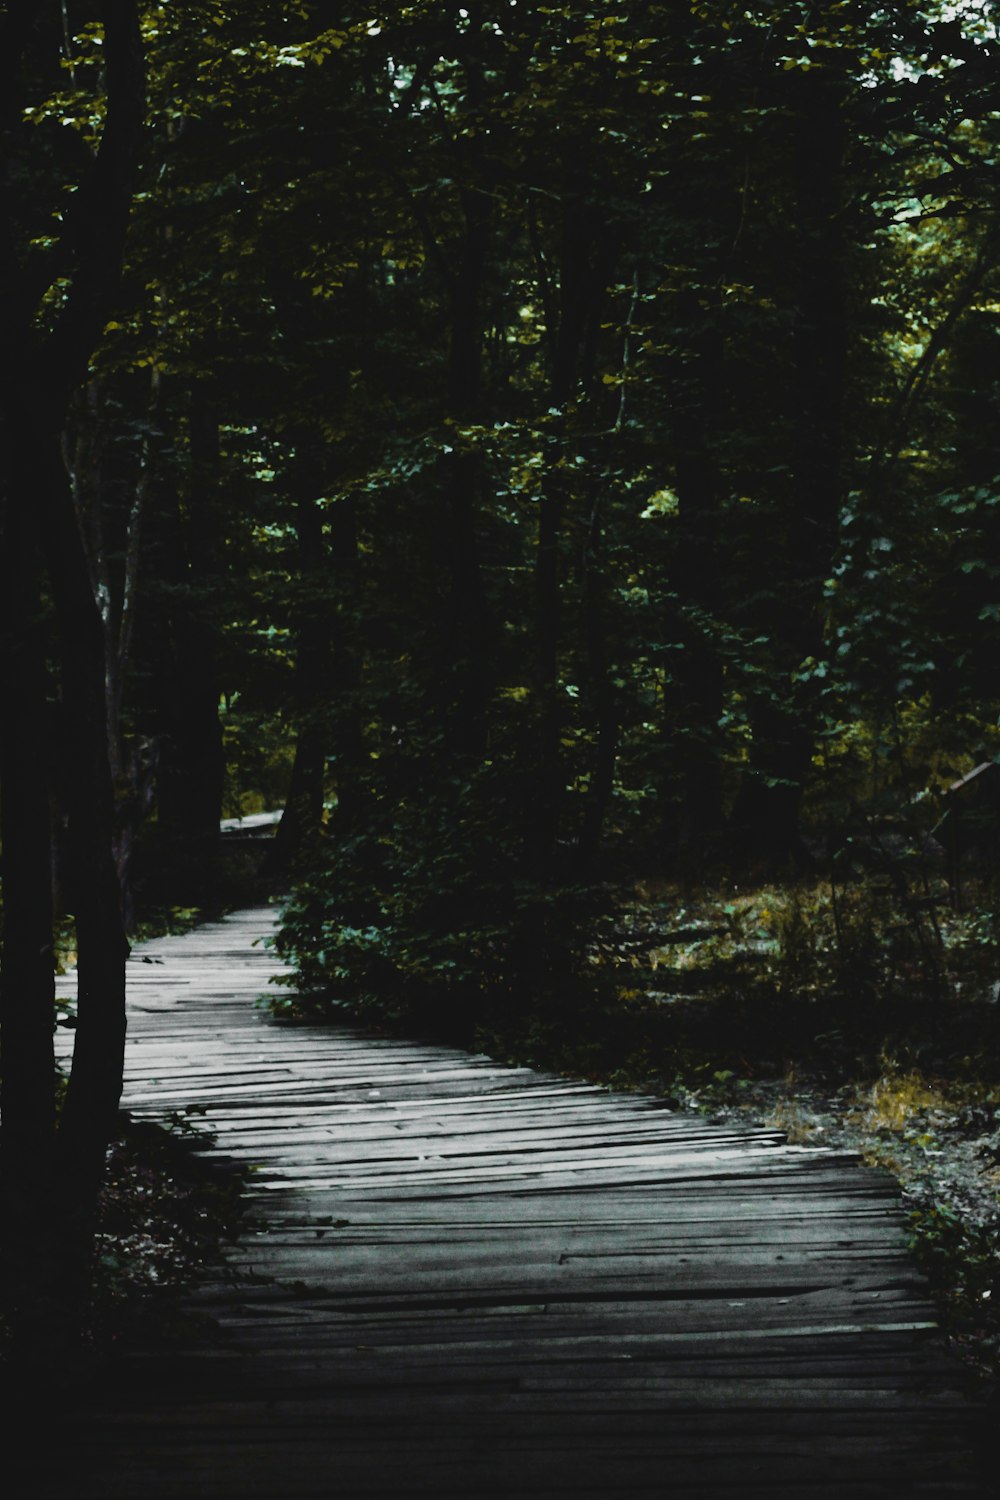 a wooden path through a forest with trees